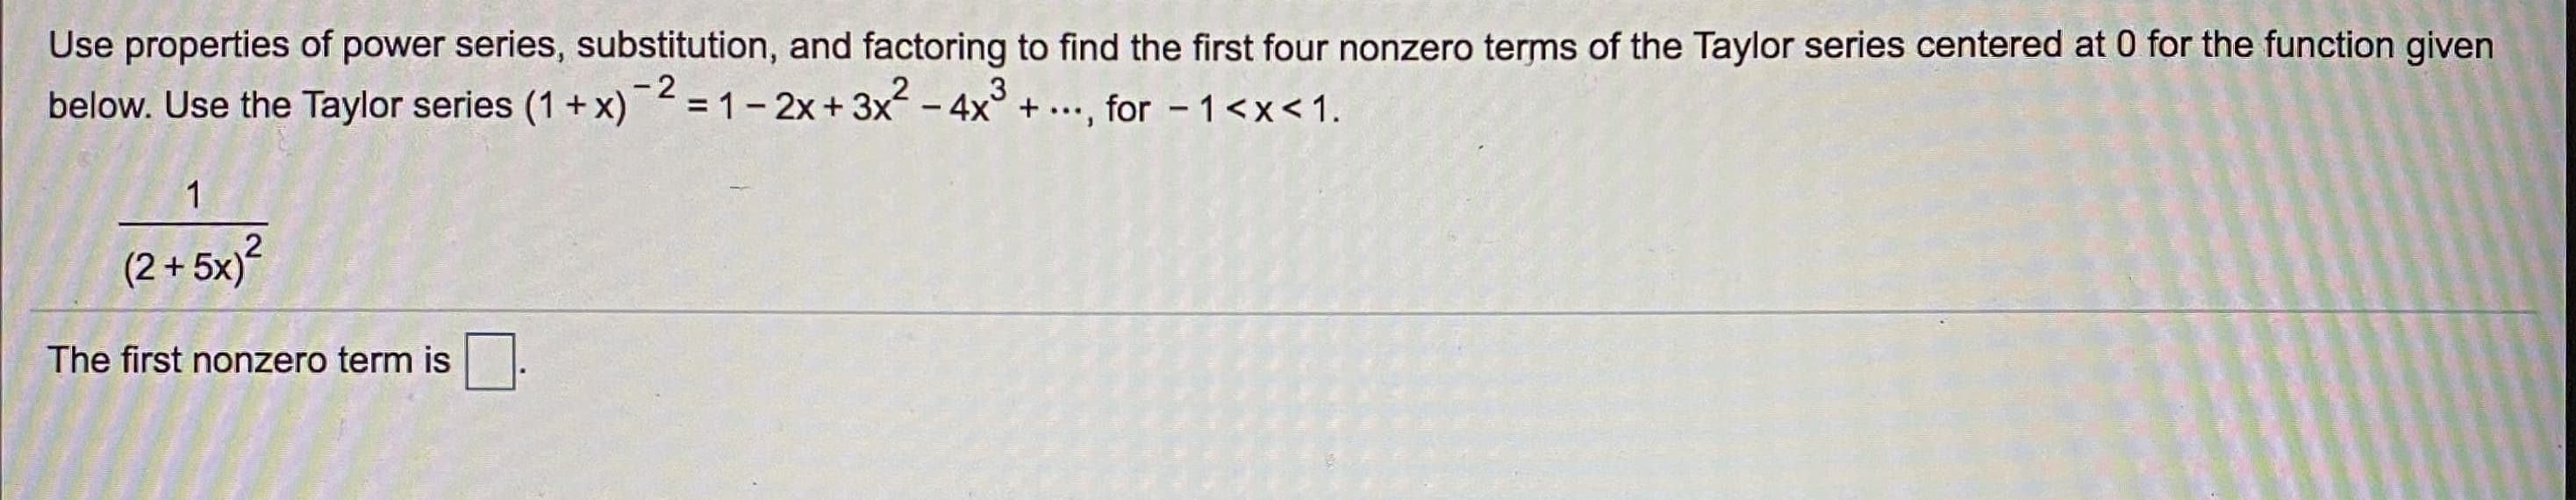 Use properties of power series, substitution, and factoring to find the first four nonzero terms of the Taylor series centered at 0 for the function given
below. Use the Taylor series (1 + x)² =1- 2x+3x - 4x° + ..., for - 1<x<1.
- 2
(2 + 5x)?
The first nonzero term is
